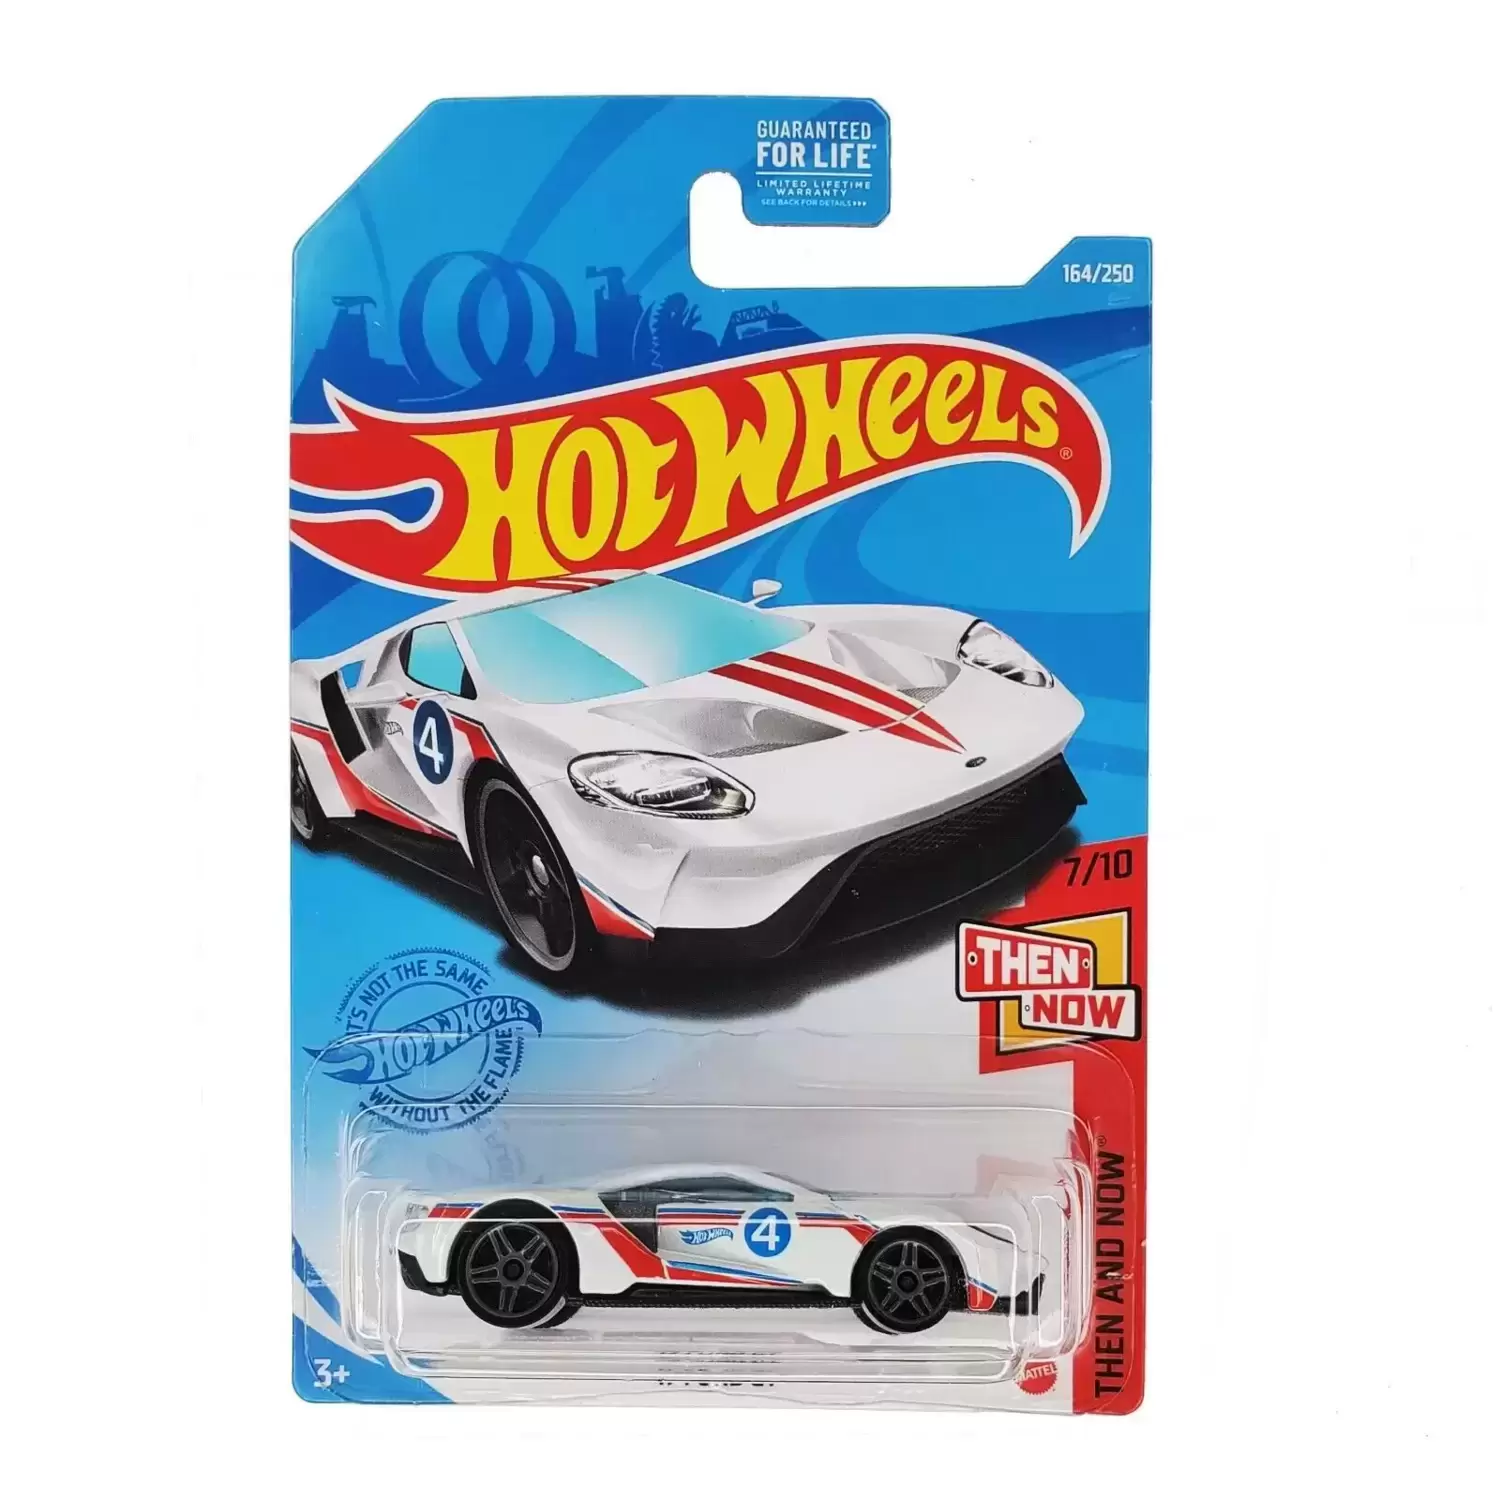 Mainline Hot Wheels - \'17 Ford GT 7/10 Then and Now